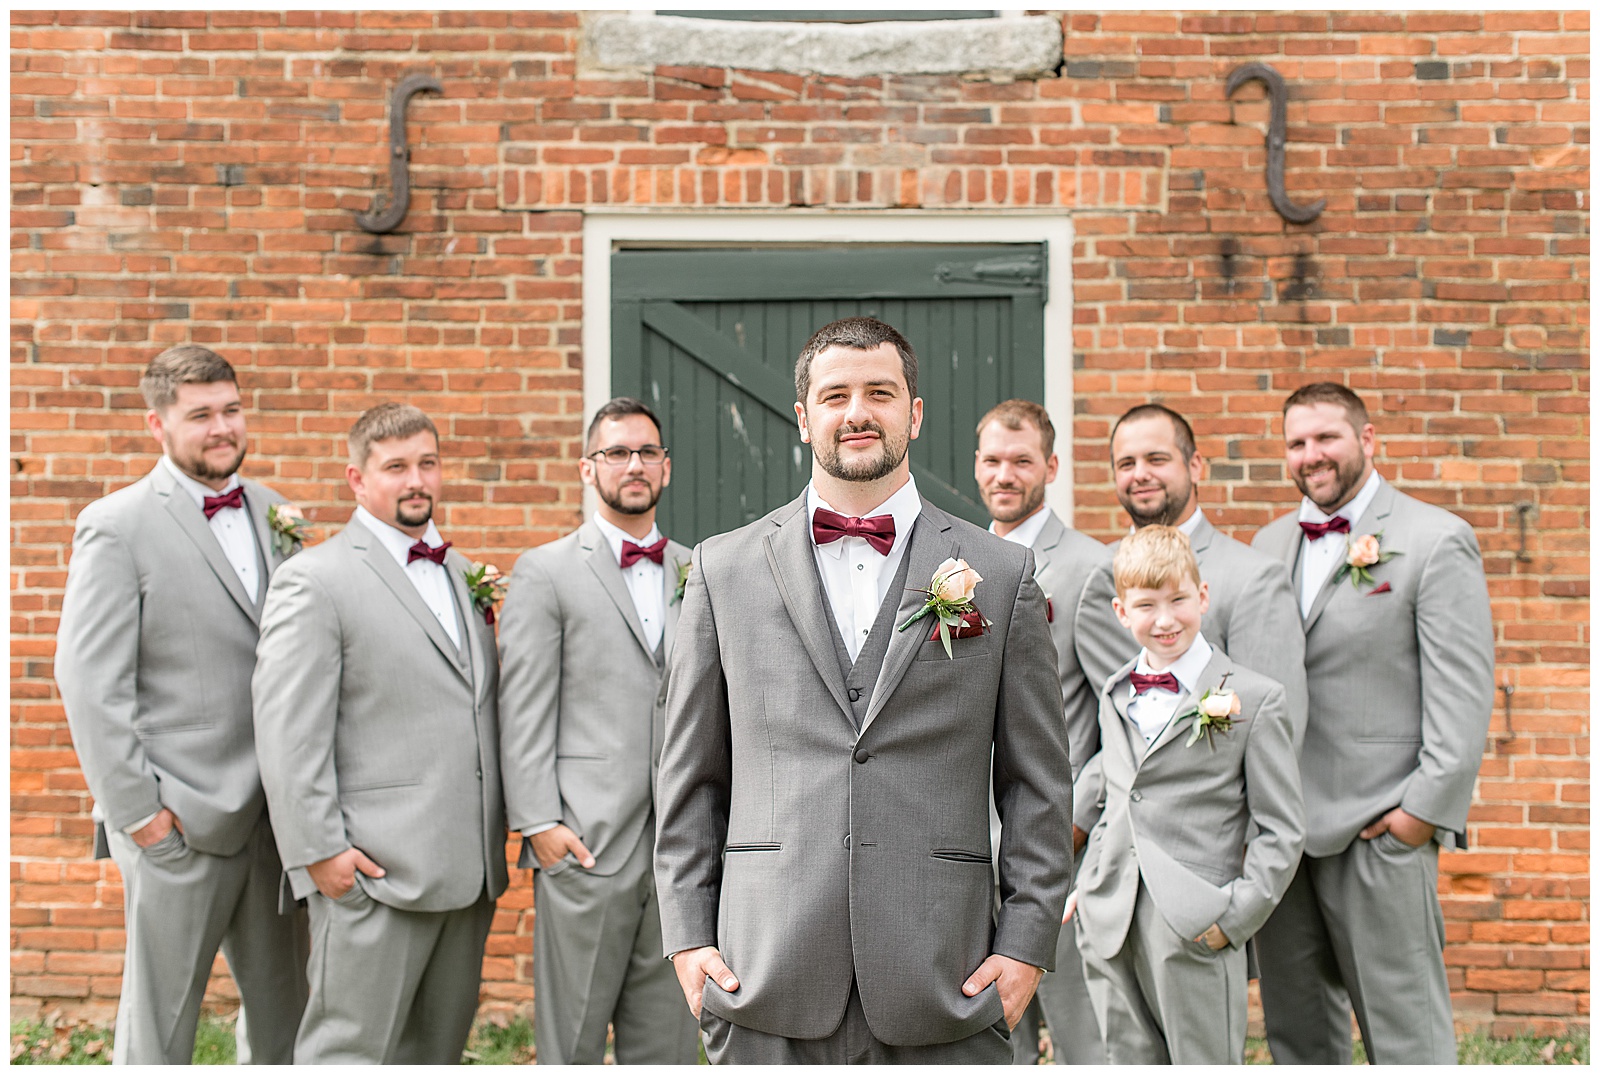 groom and groomsmen with hands in pockets by brick building at hayfields country club